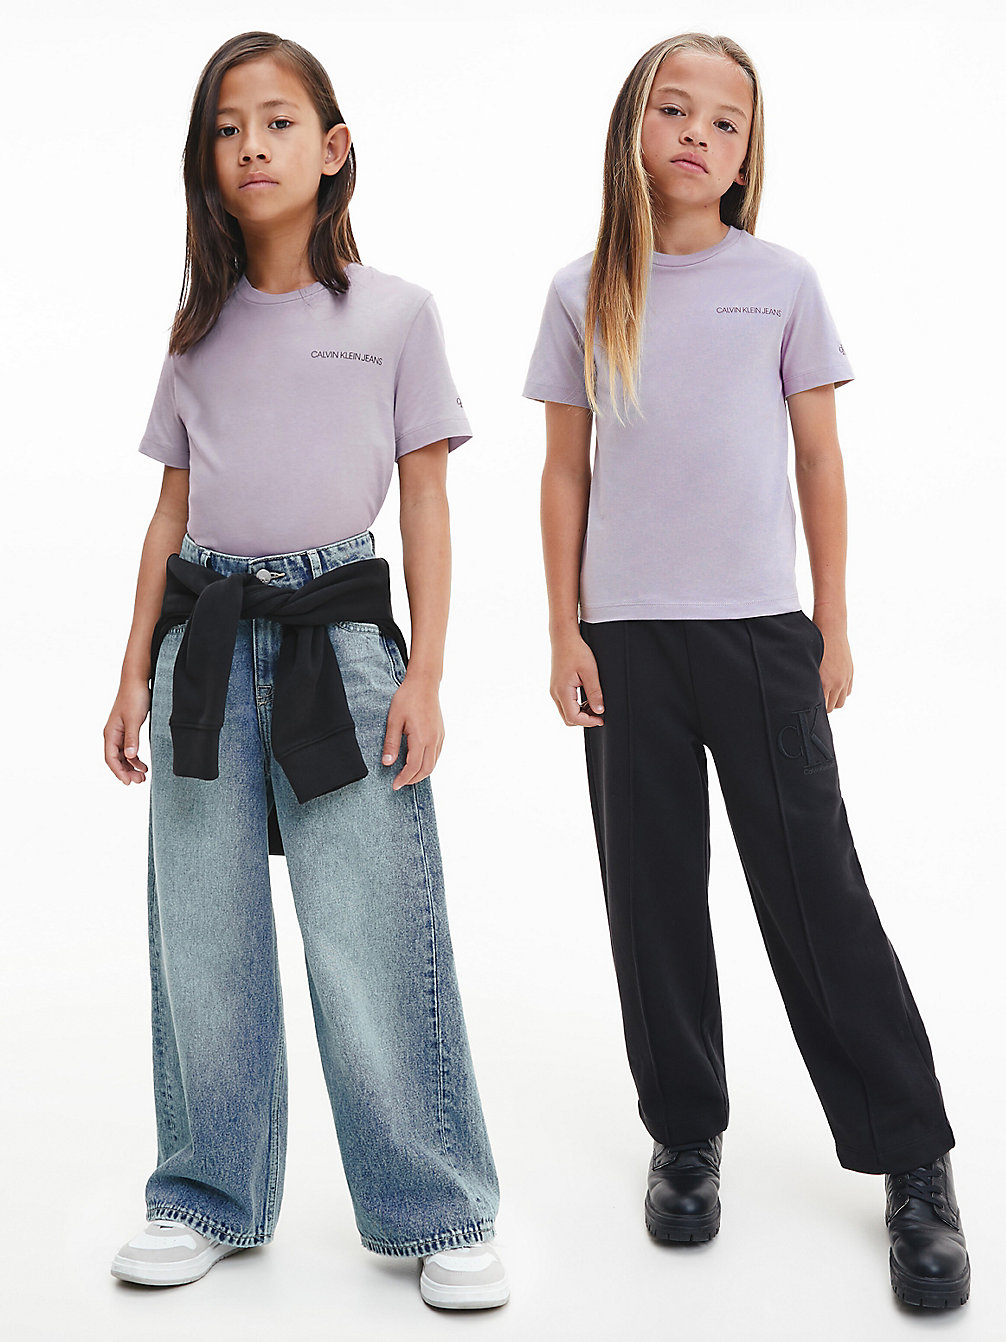 T-Shirt Unisex In Cotone Biologico > SMOKY LILAC > undefined kids unisex > Calvin Klein